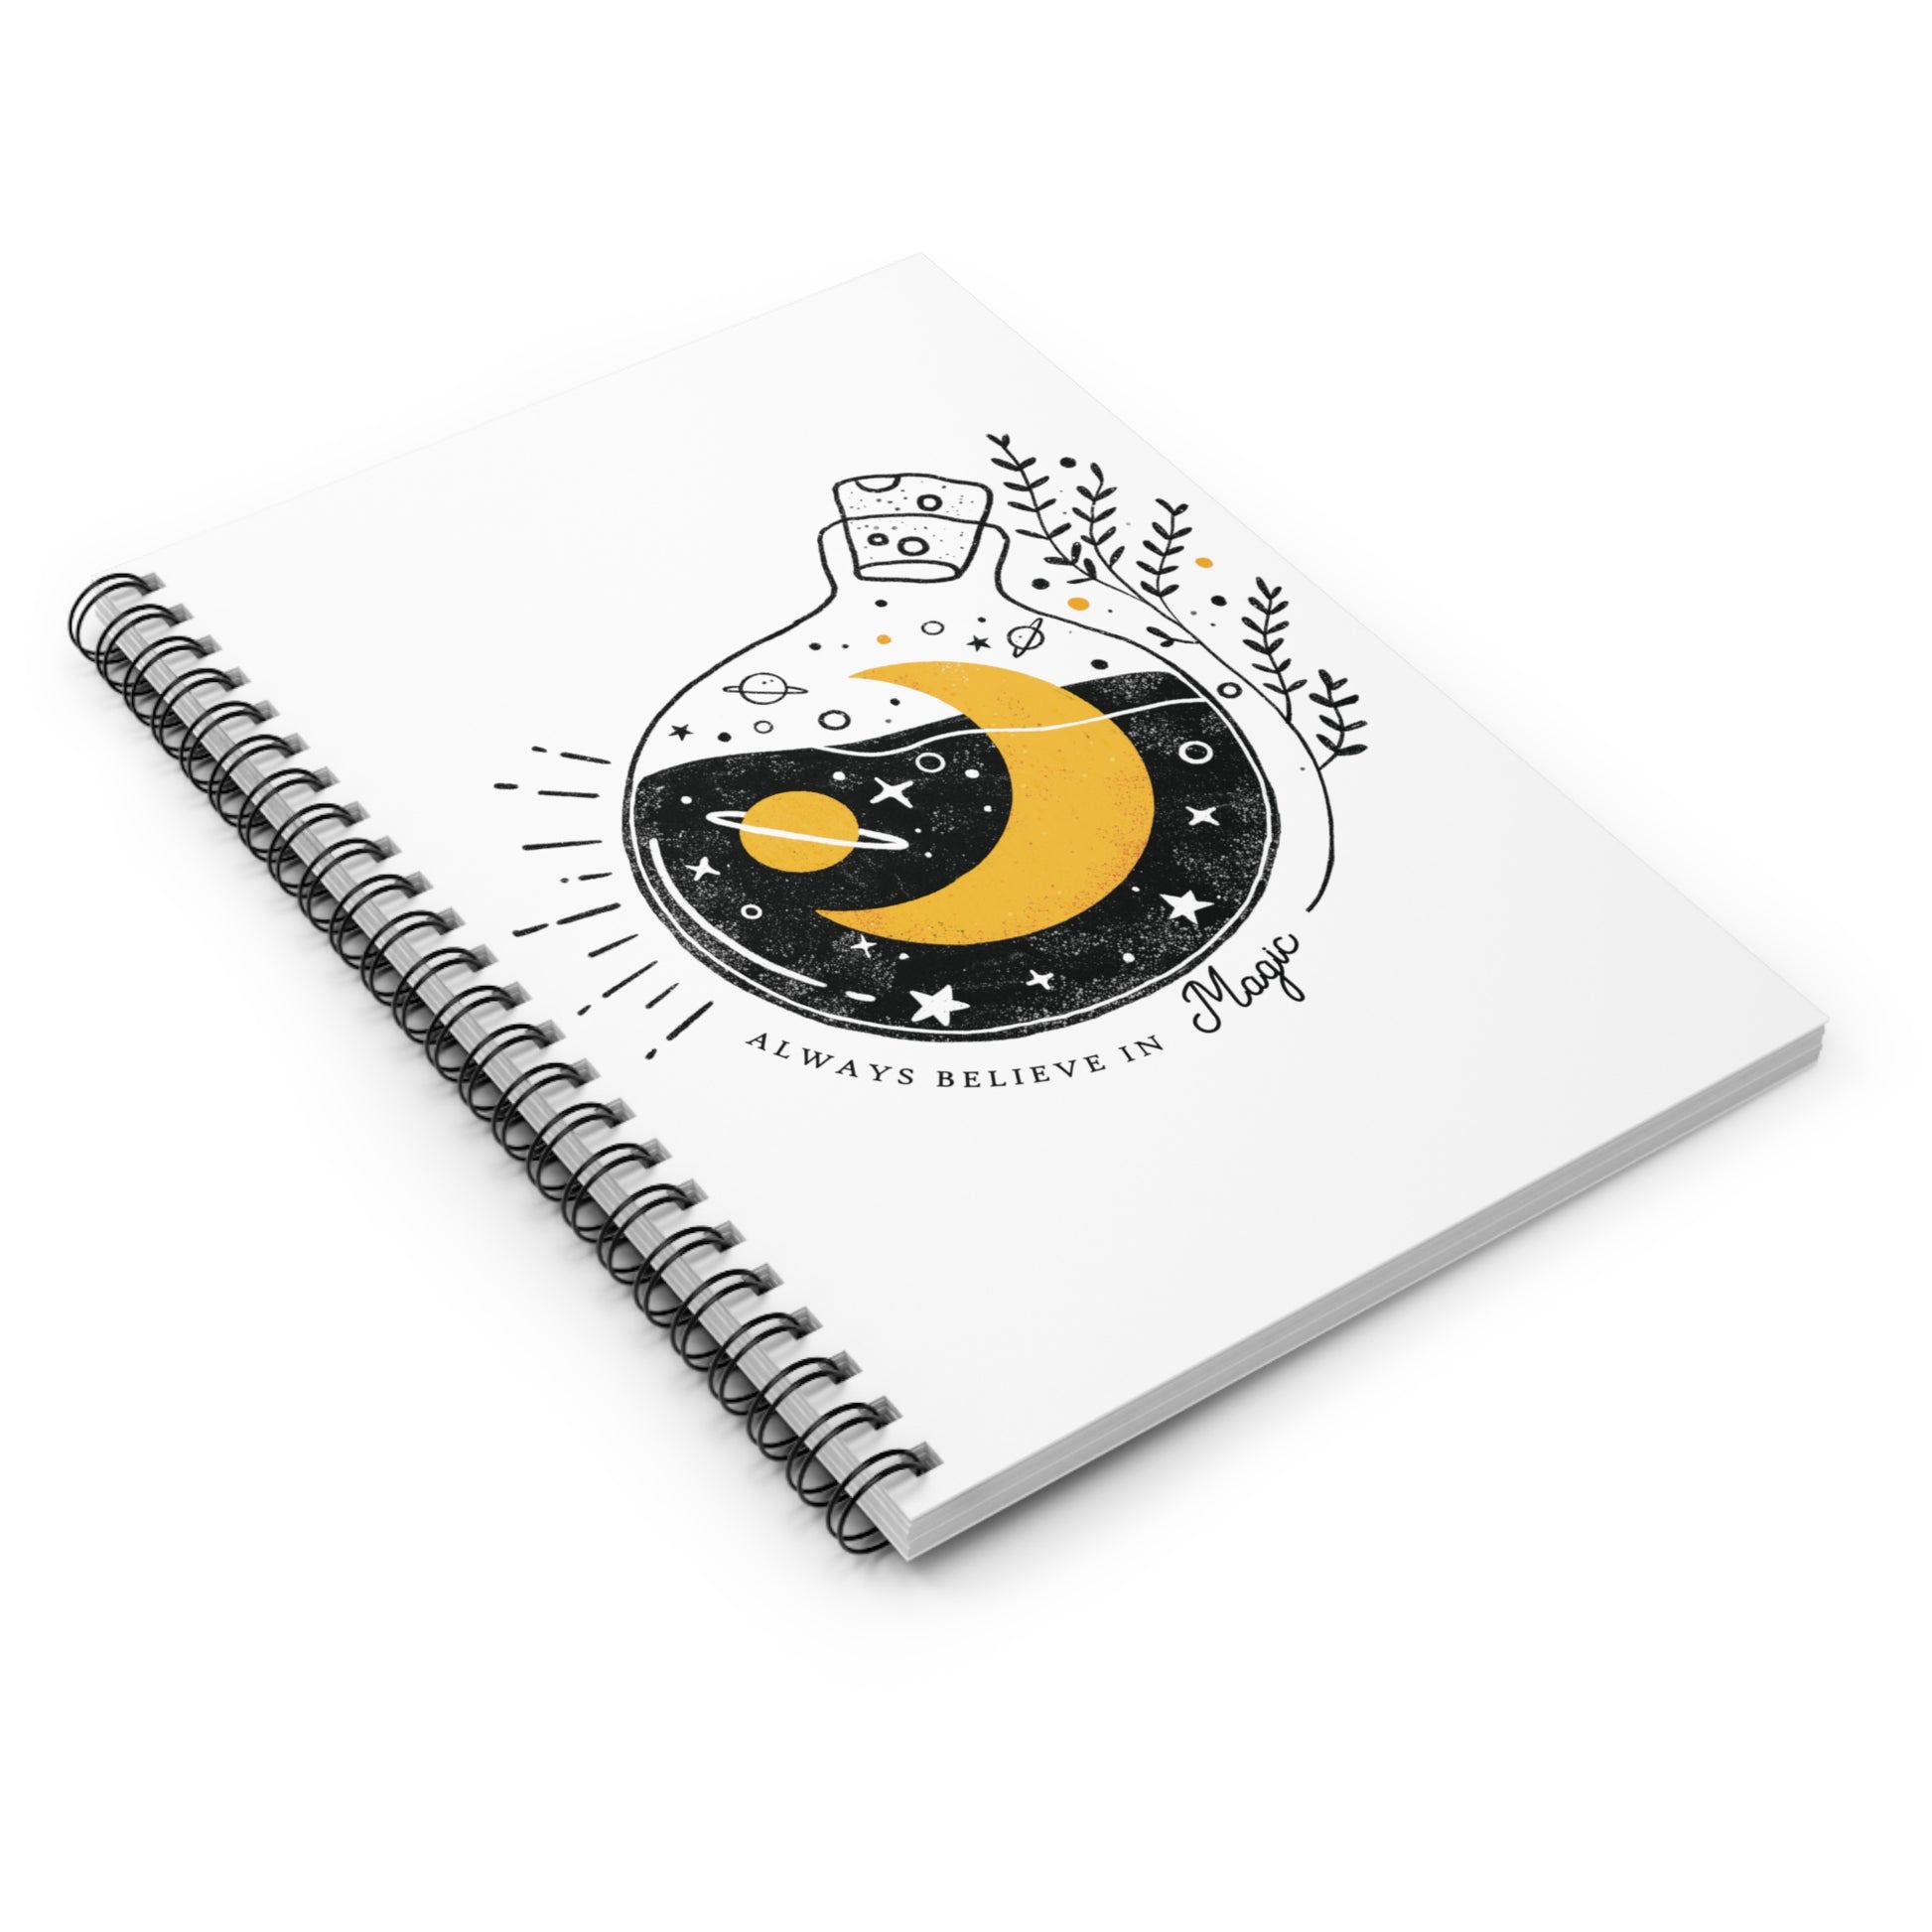 Believe in Magic: Spiral Notebook - Log Books - Journals - Diaries - and More Custom Printed by TheGlassyLass